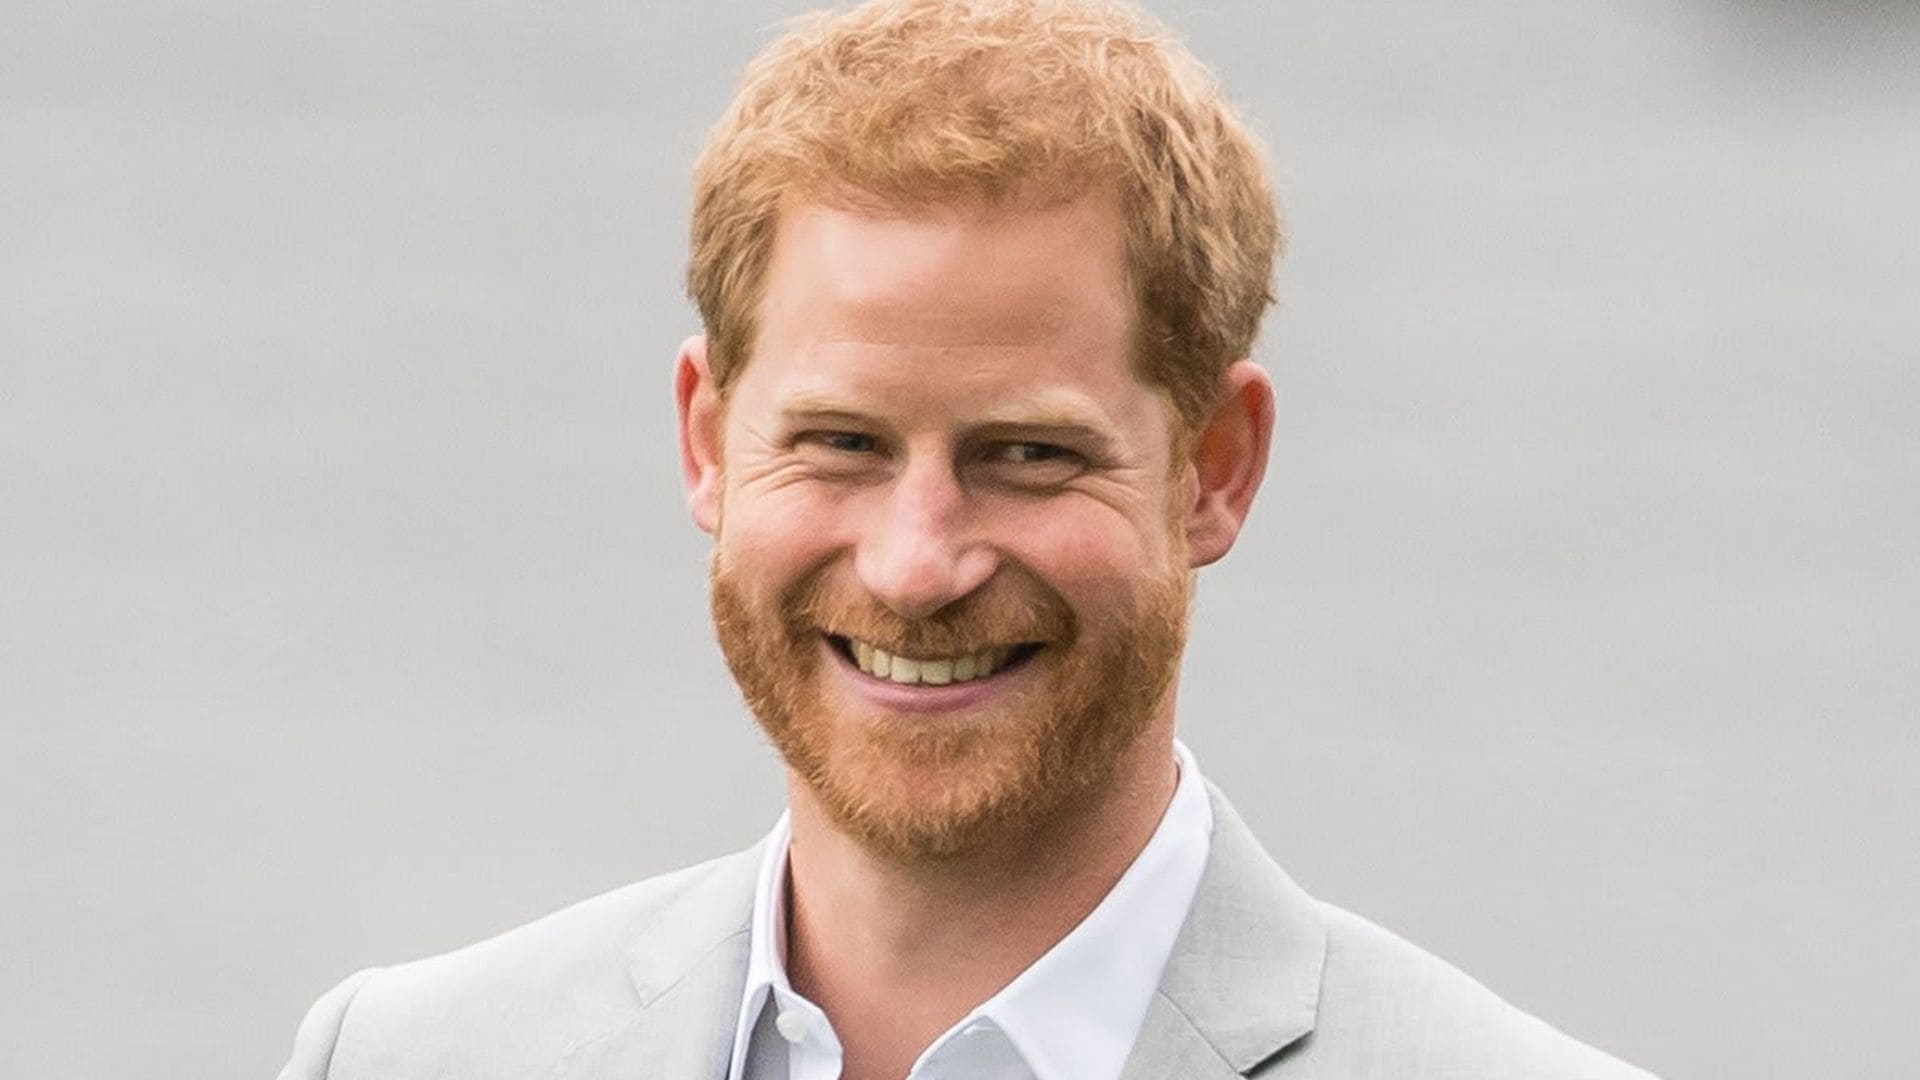 Prince Harry is writing memoir about his life ‘that’s accurate and wholly truthful’